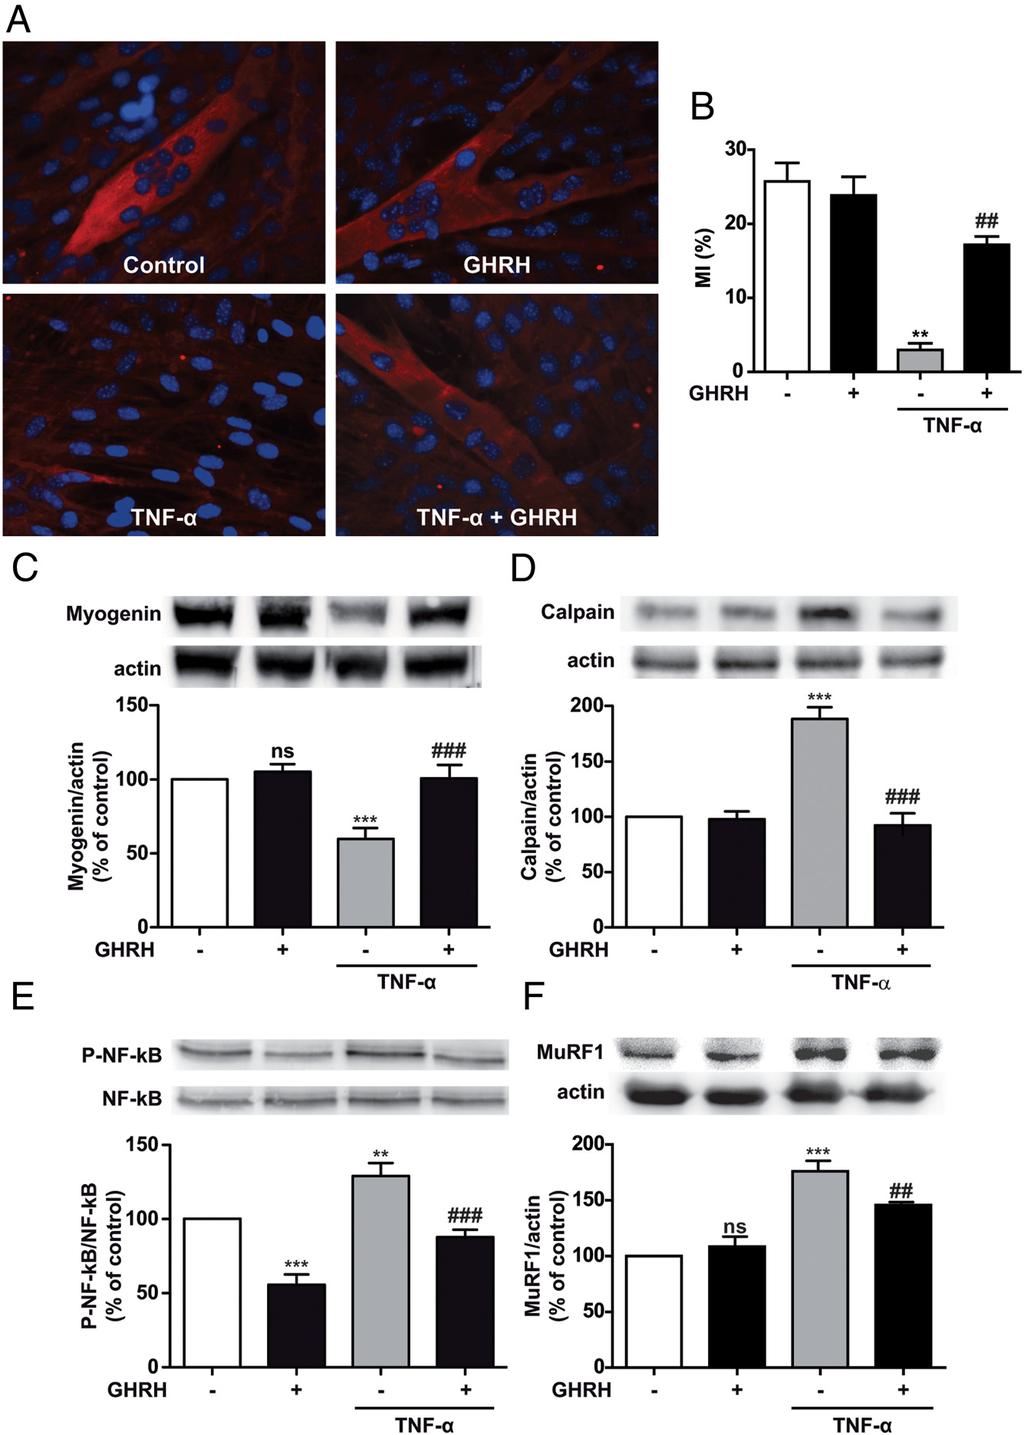 doi: 10.1210/EN.2015-1098 press.endocrine.org/journal/endo 3249 Figure 6. GHRH protective effects against TNF- -induced protein degradation and activation of proteolytic pathways.